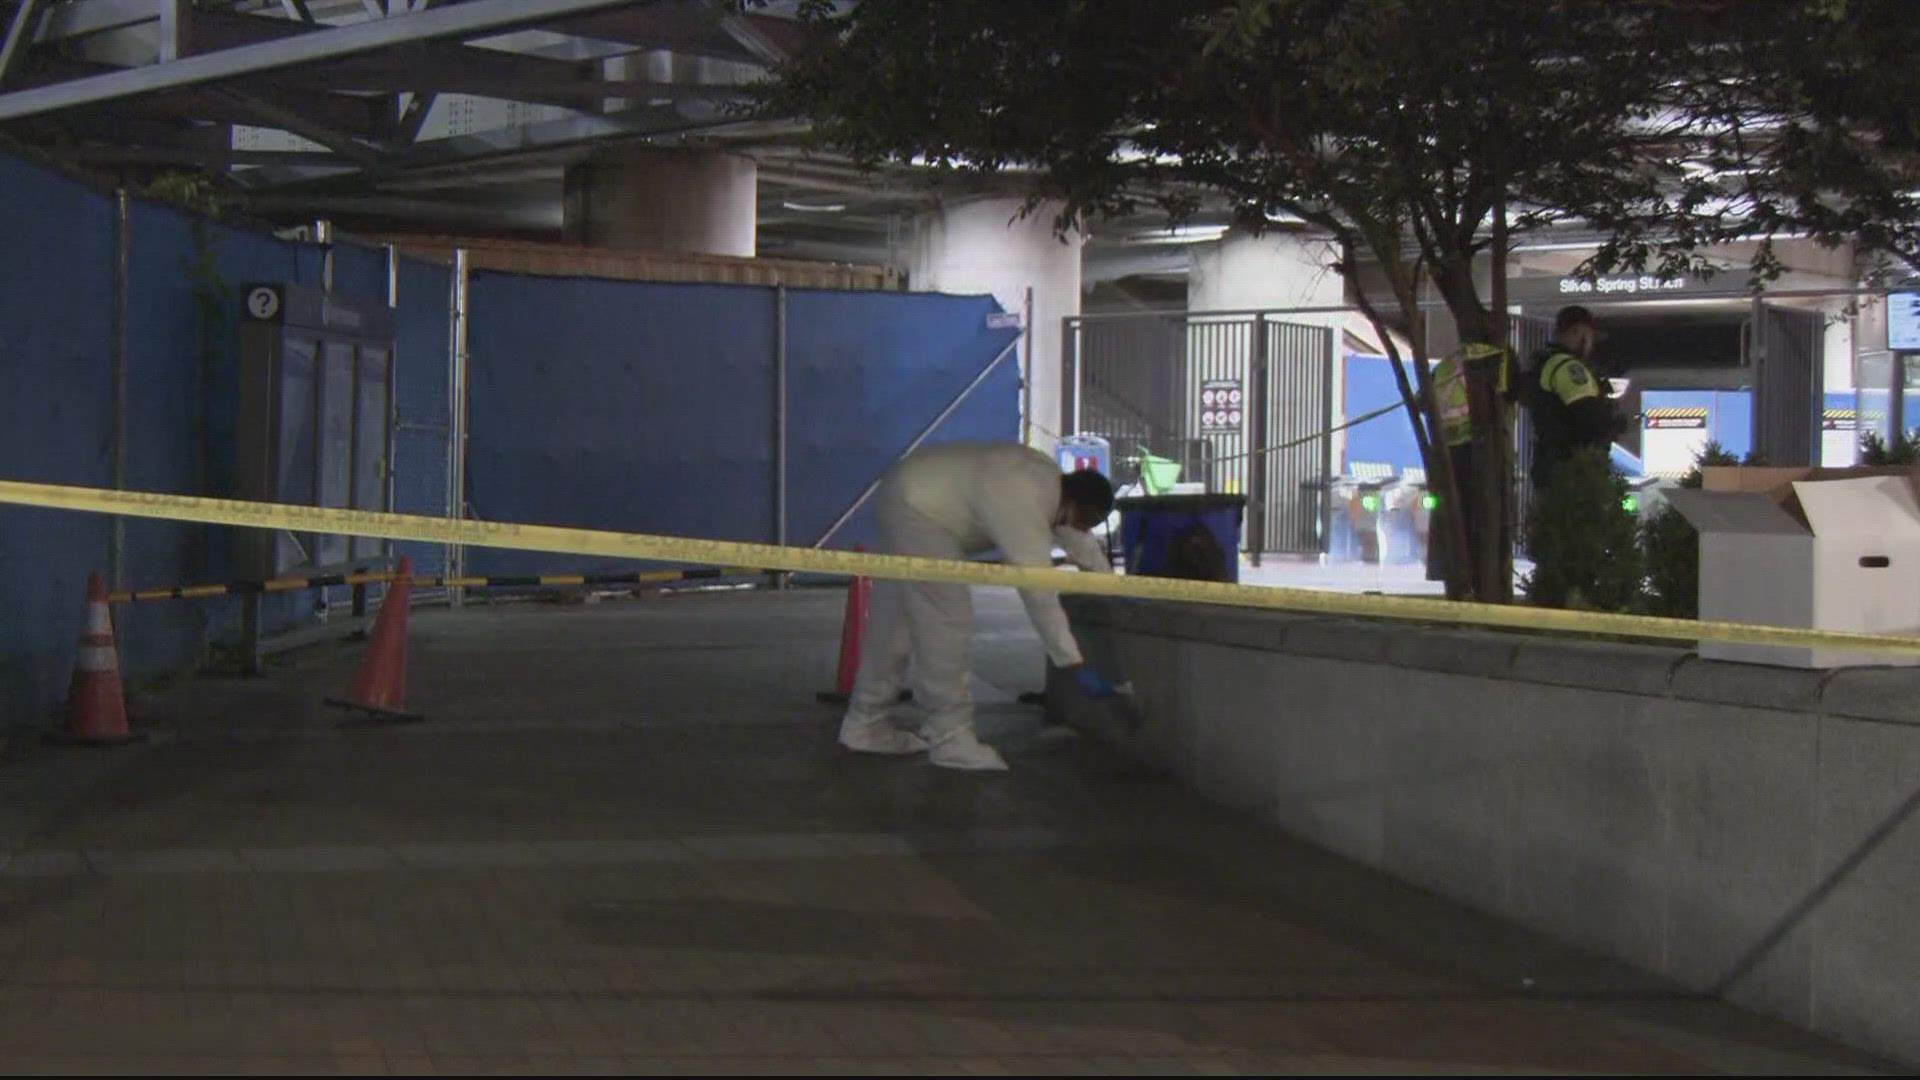 The victim, who has only been identified as a Metro contractor, was taken to an area hospital for help.